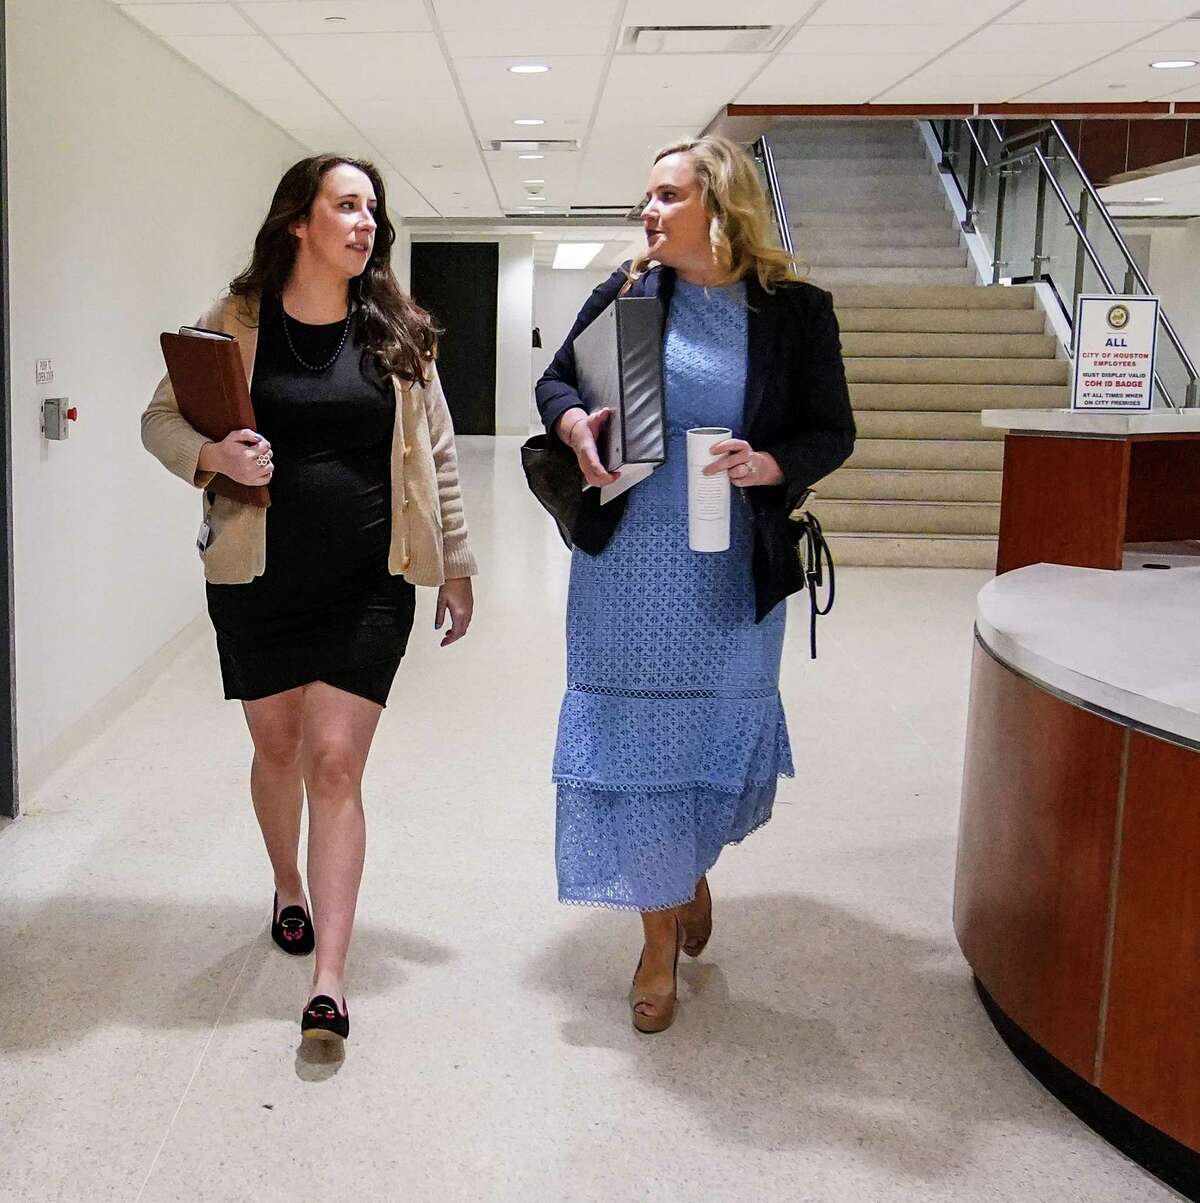 Katie Shelton, left, Chief of Staff for Councilwoman Mary Nan Huffman, right, walk over to chambers at City Hall on Wednesday, April 13, 2022 in Houston. City of Houston employees soon could be eligible for up to three months of paid parental leave under a policy change that passed in City Council on Wednesday. Shelton is a city employee who is pregnant and is due in July.